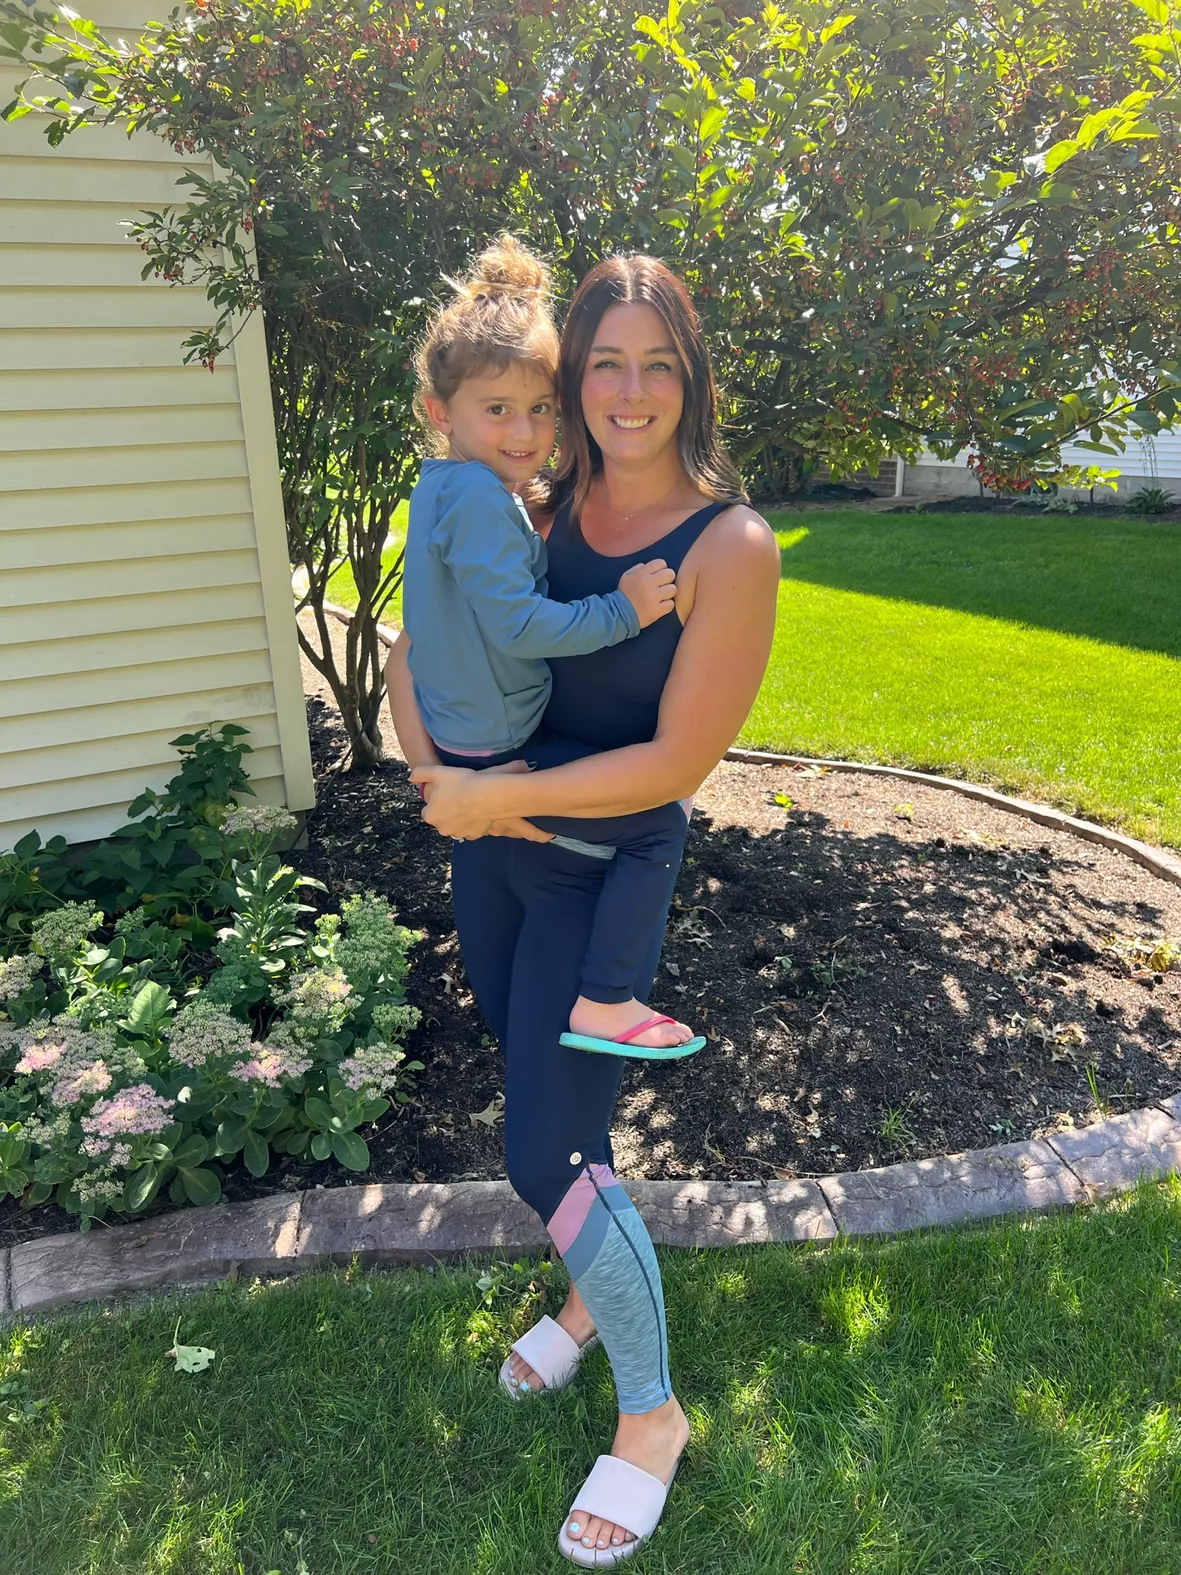 What They Wore: Jill Yoga Active Wear - momma in flip flops